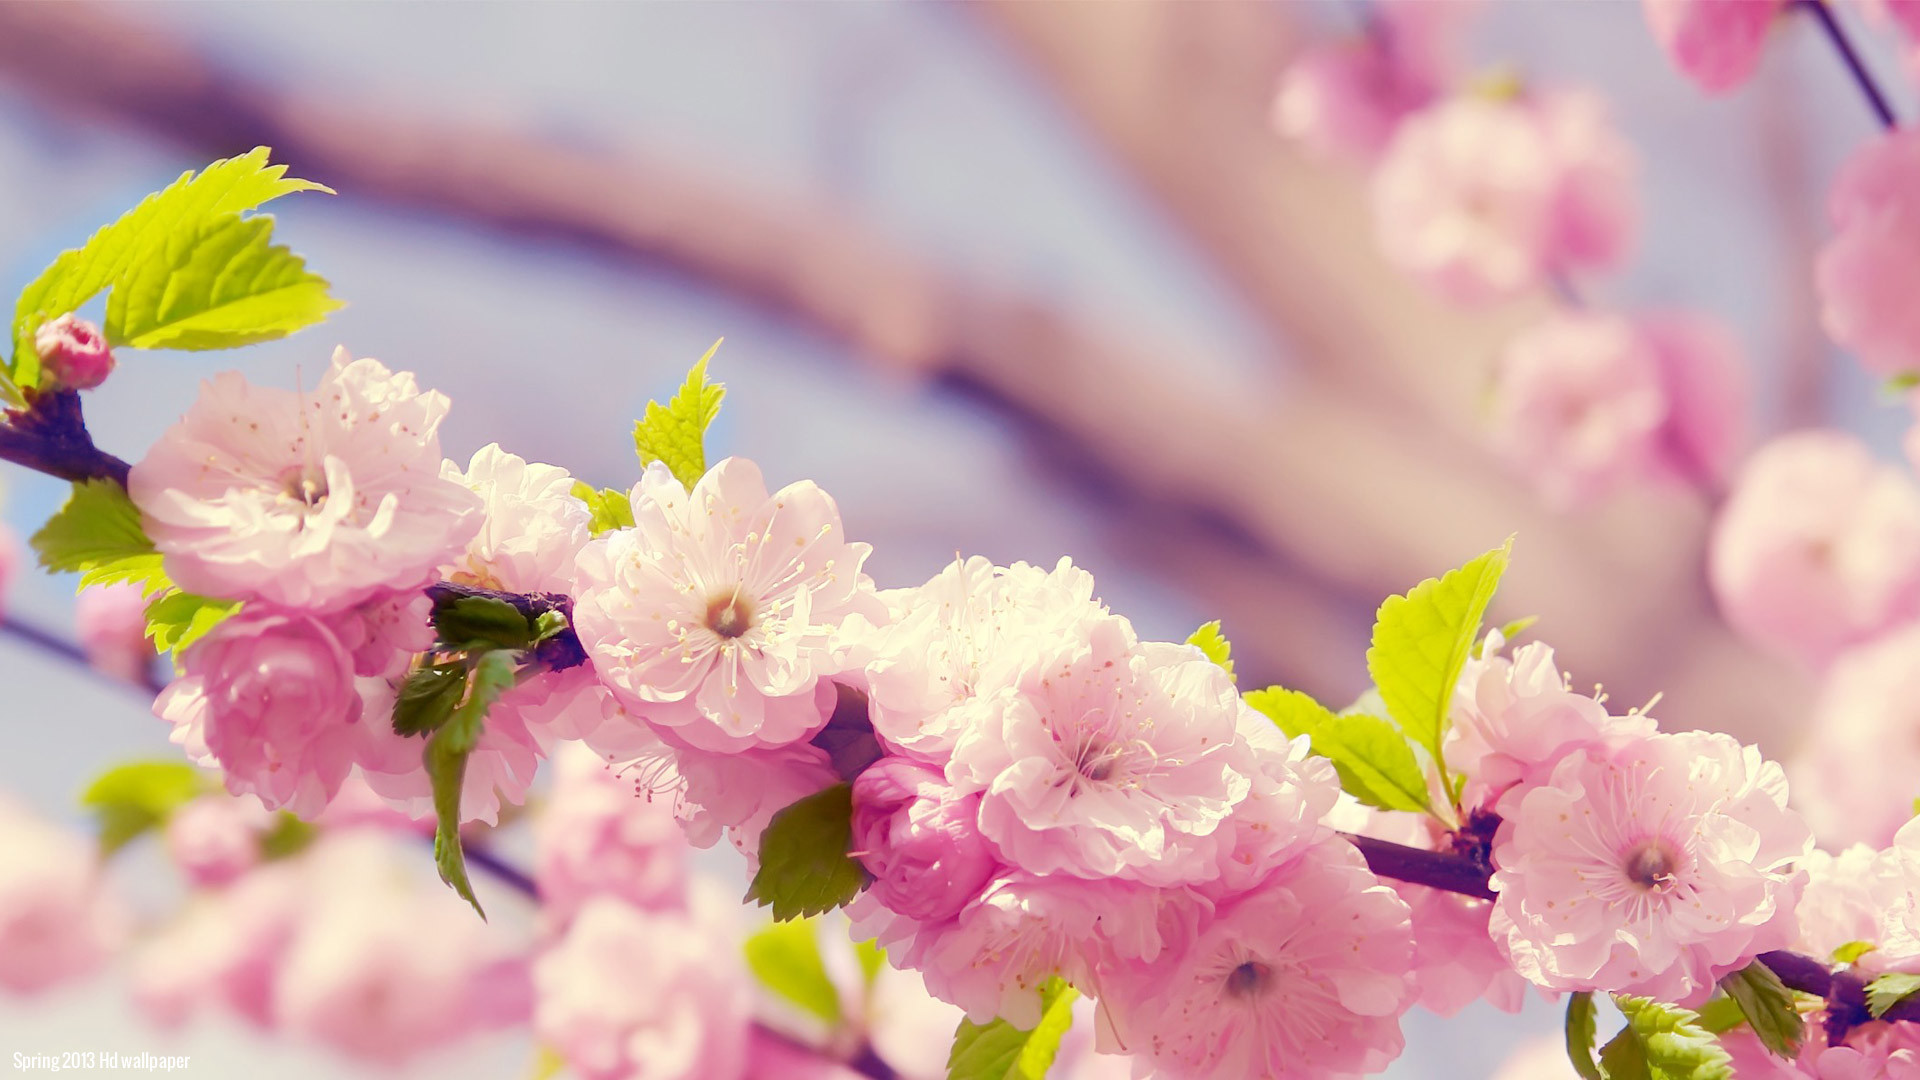 1920x1080 Beautiful Spring Flowers Images, Pictures and Wallpapers | Flower .